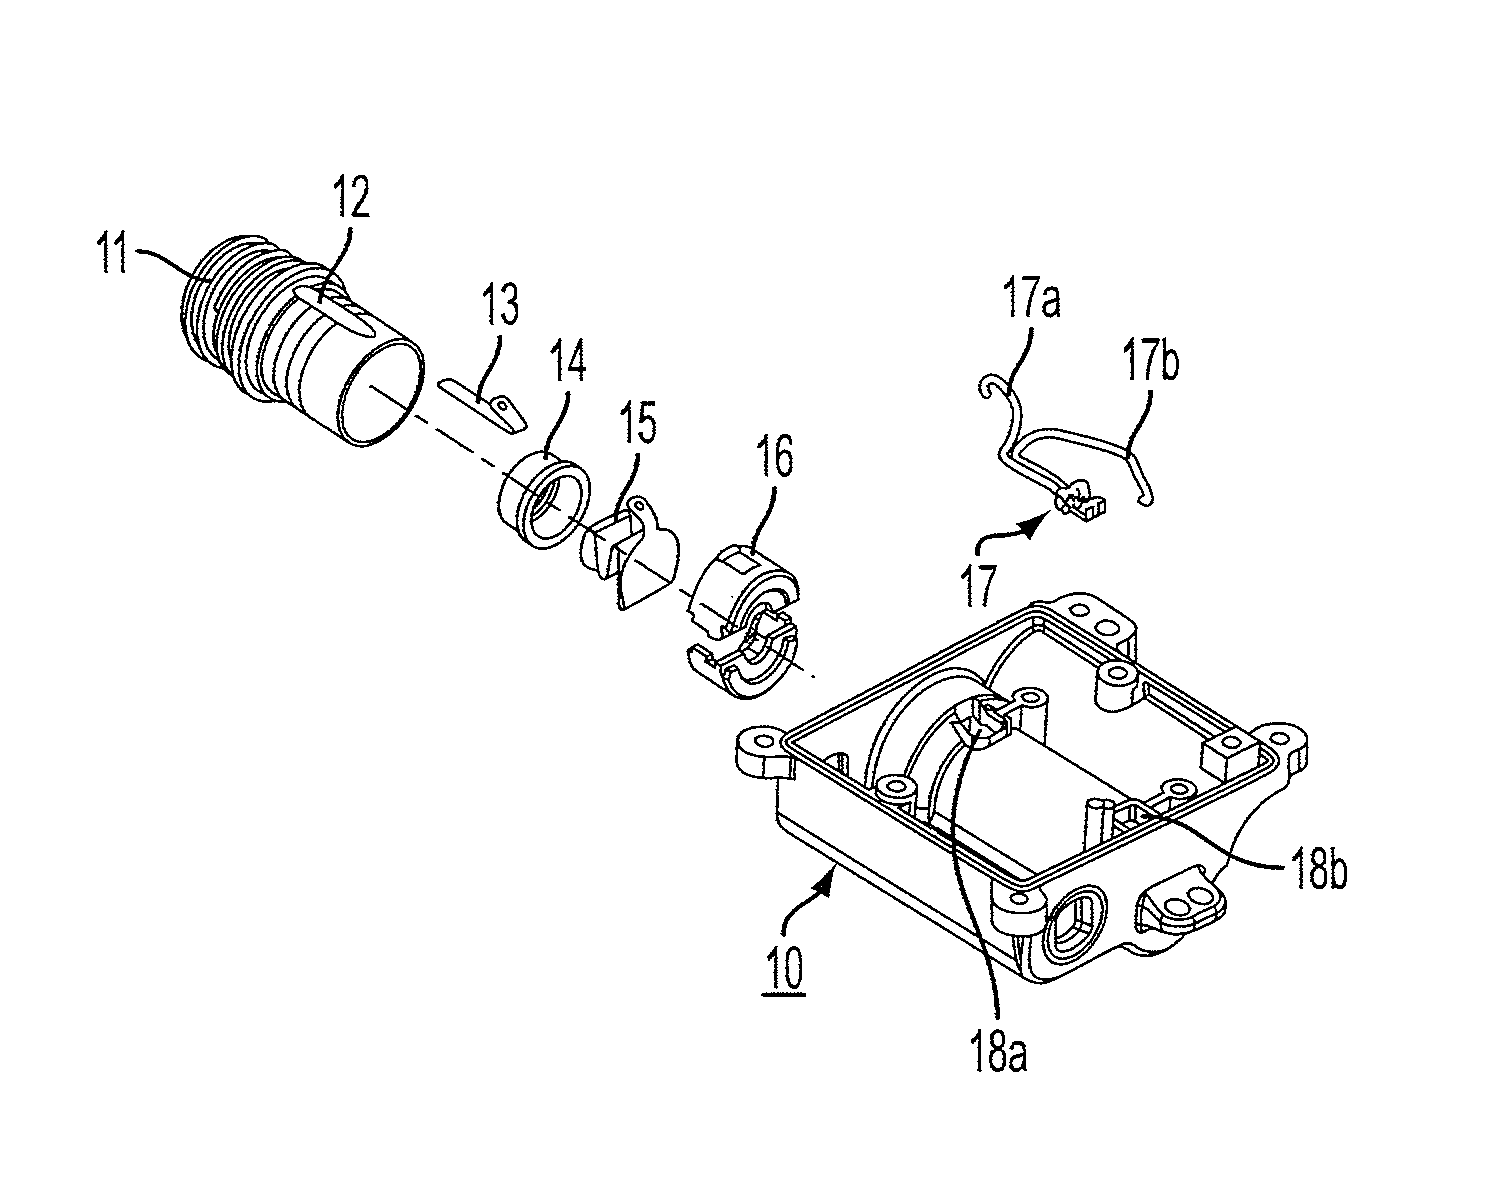 Battery housing with reverse polarity protection